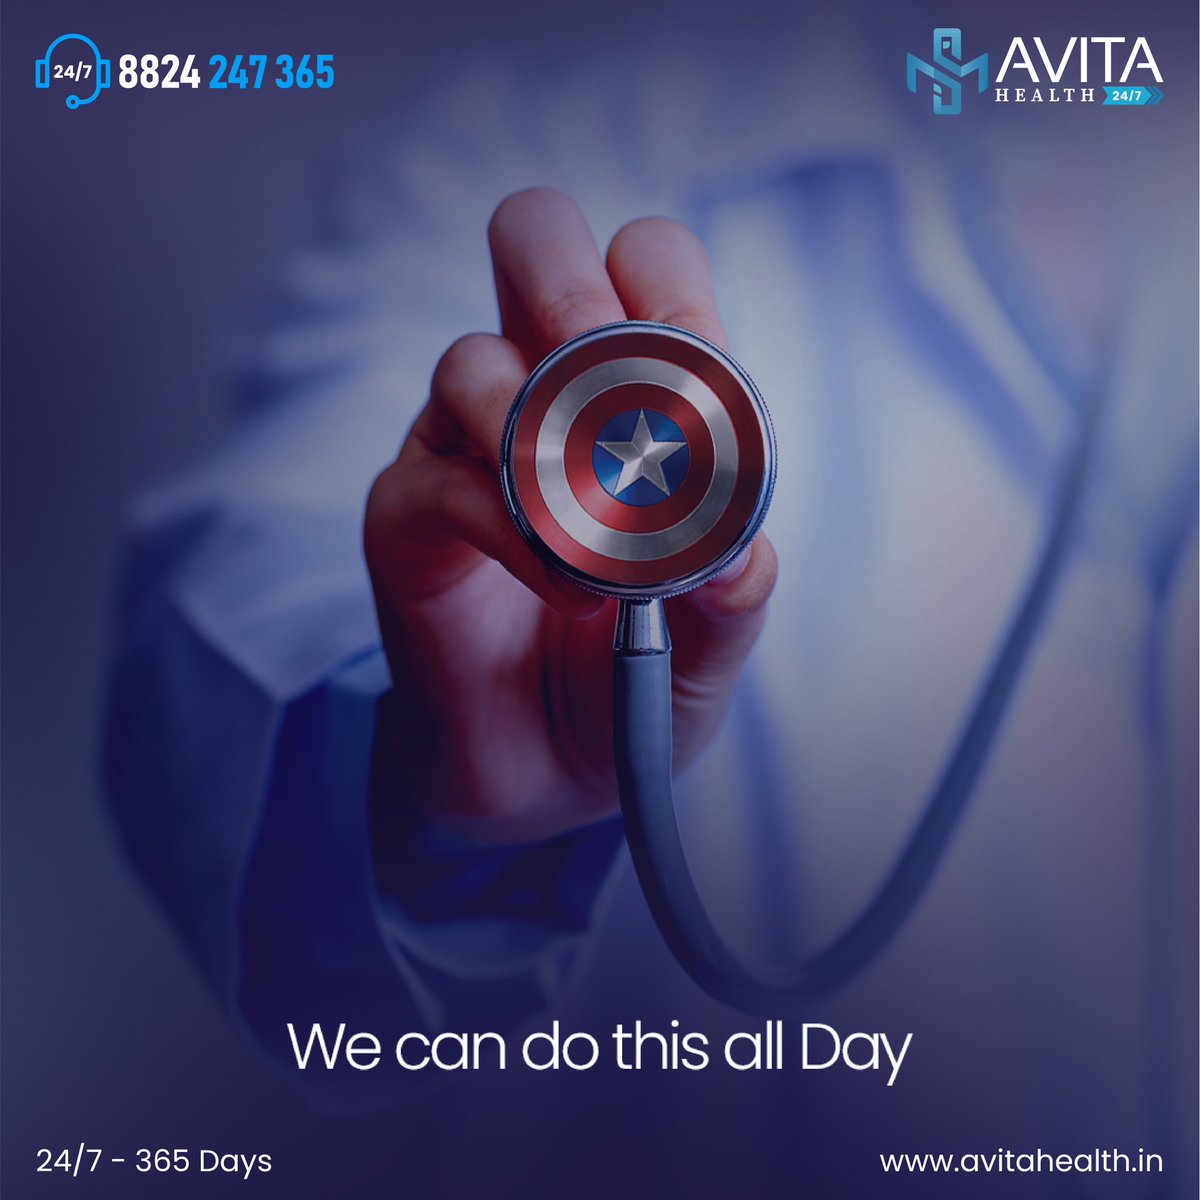 A promise to serve you 24x7, 365 days. 

#AvitaHealth24x7 #AtHomeHealthcare #HomeHealthcare #HomeMedicalCare #DoctorOnCall #DoctorAtHome #DentalTreatments #AestheticTreatment #future #healthcarefuture #fasthealthy #health #healthcare #health #healthyhabits #healthychoices